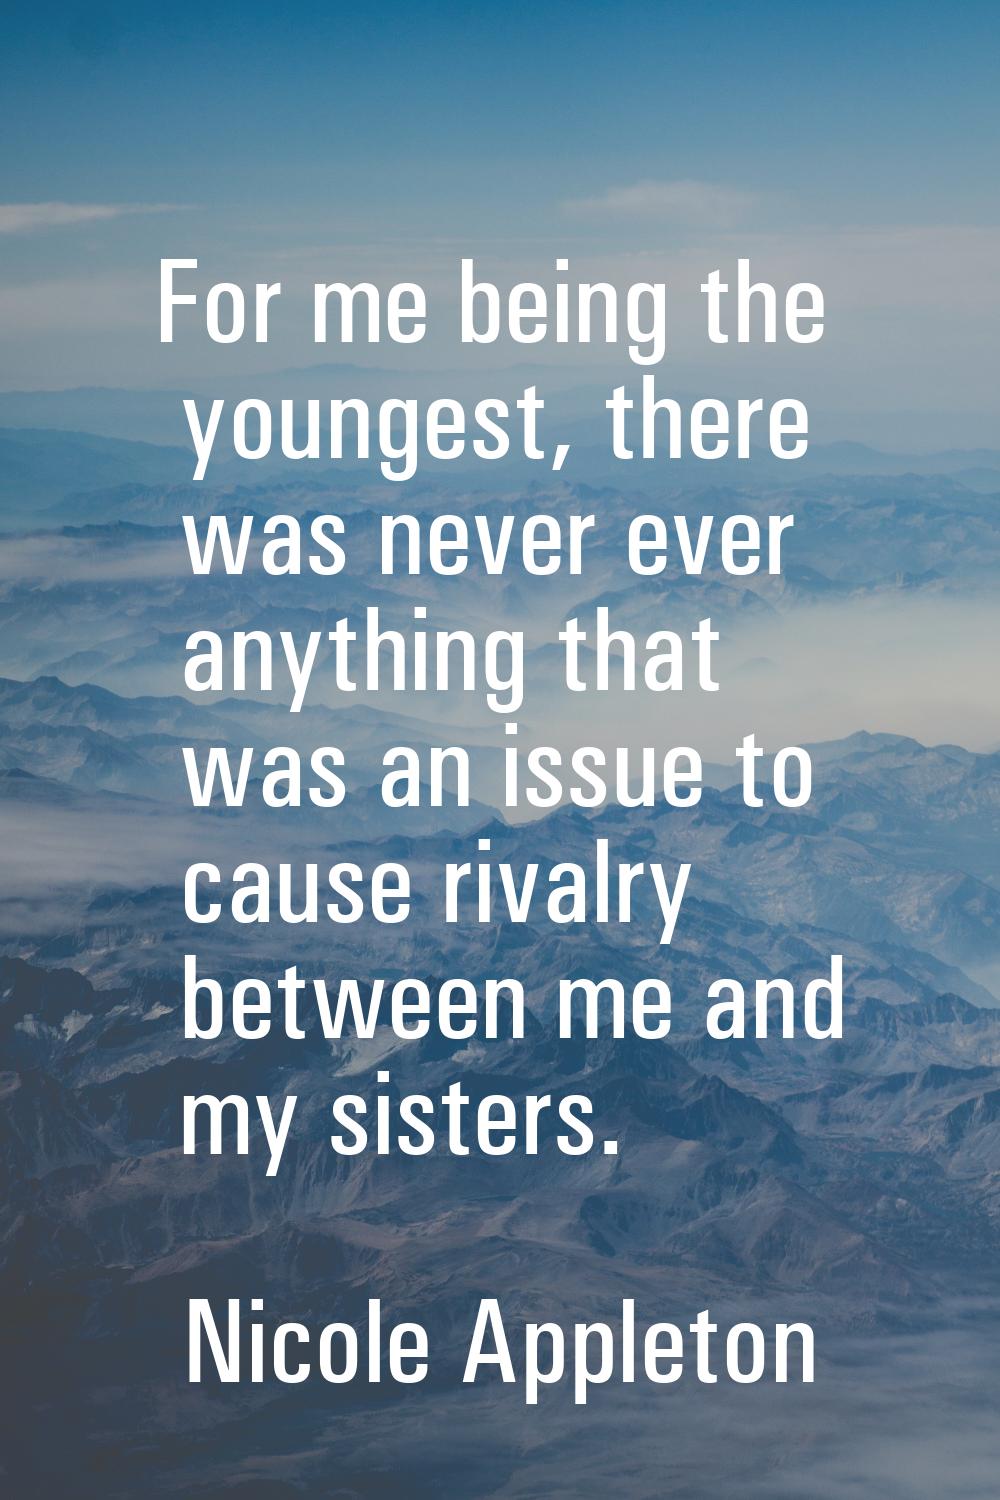 For me being the youngest, there was never ever anything that was an issue to cause rivalry between